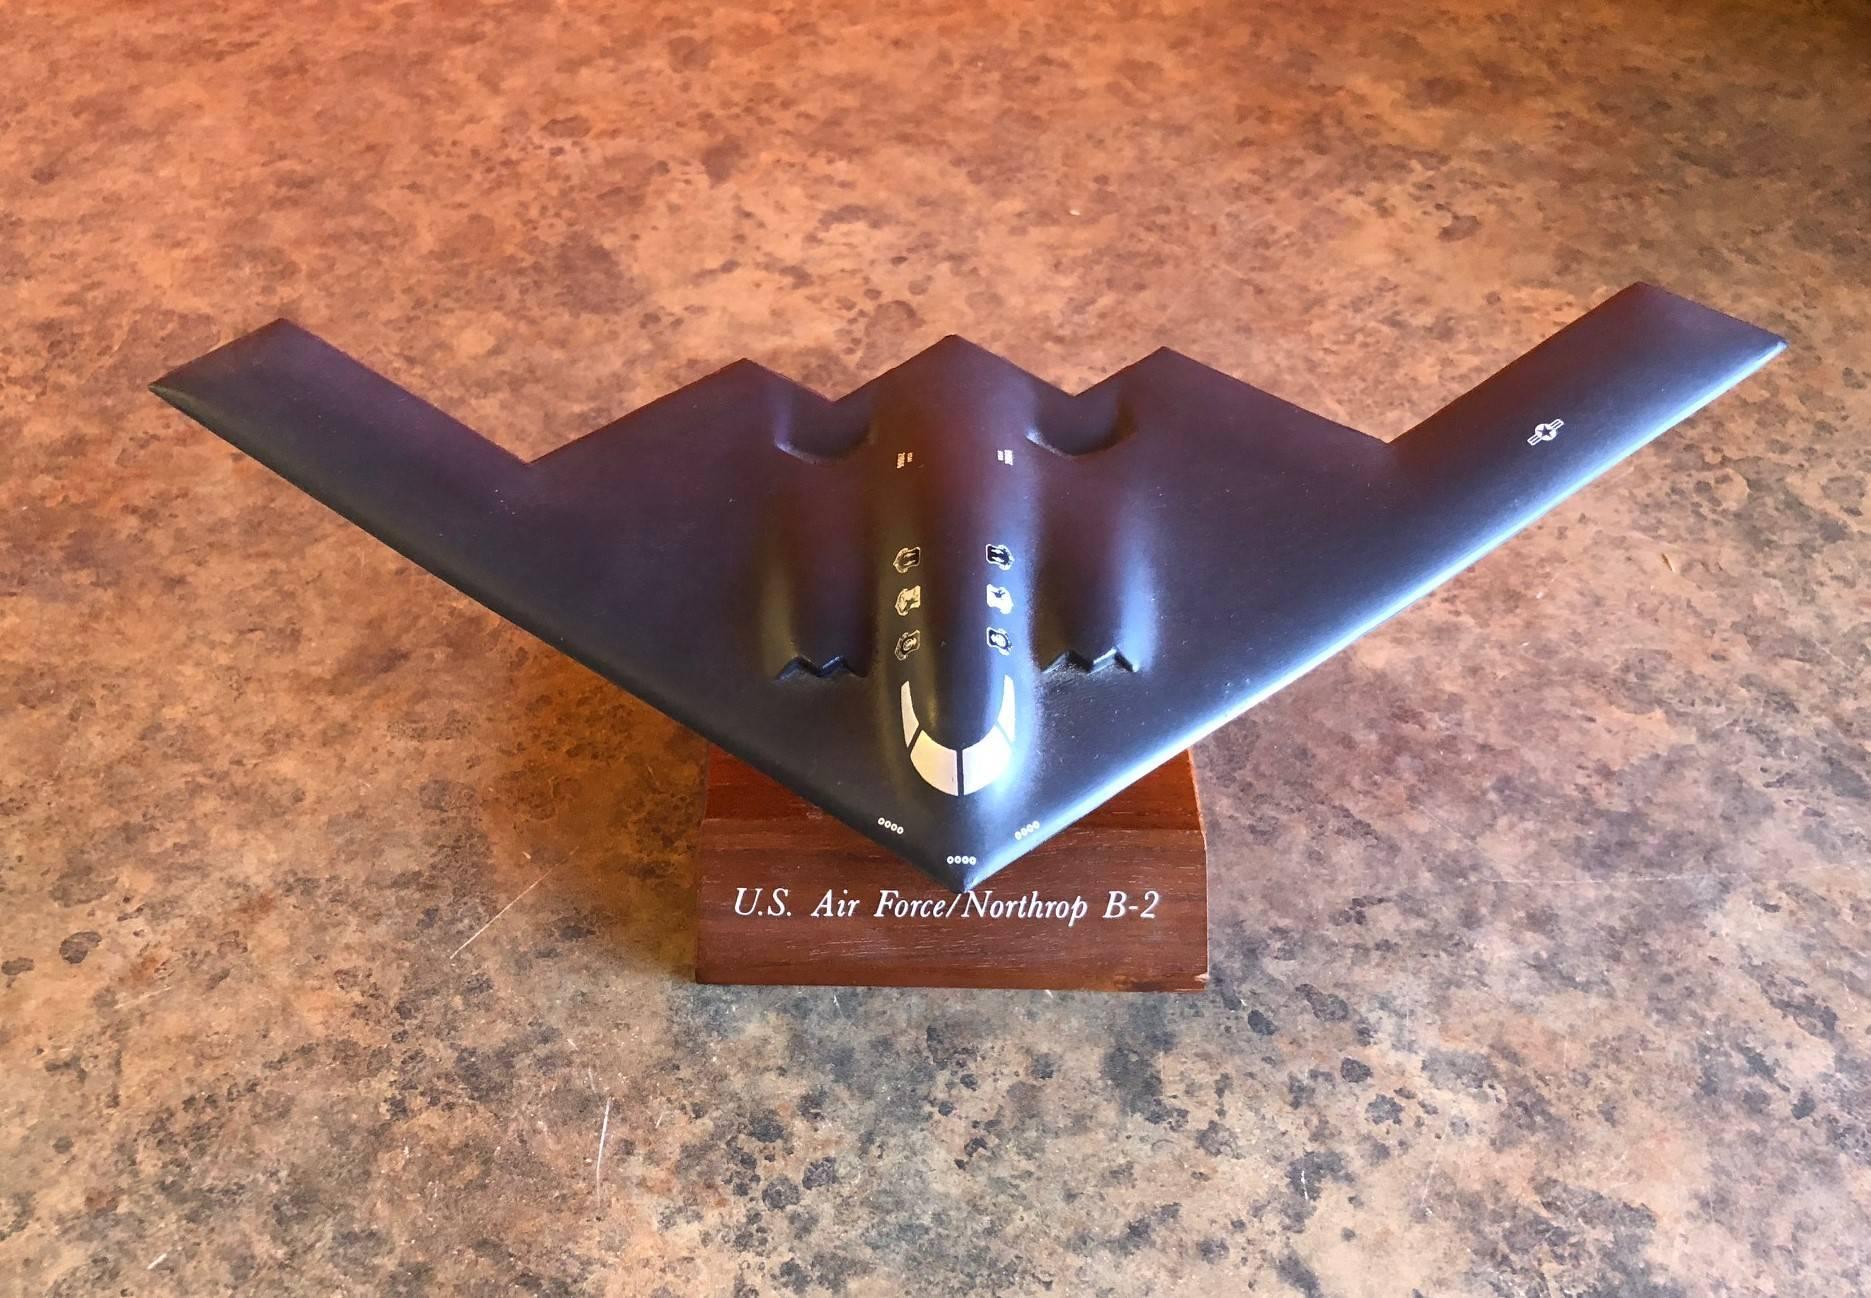 Air Force B-2 Bomber desk model, circa 1989. A very cool piece made of high quality plastic measuring 11